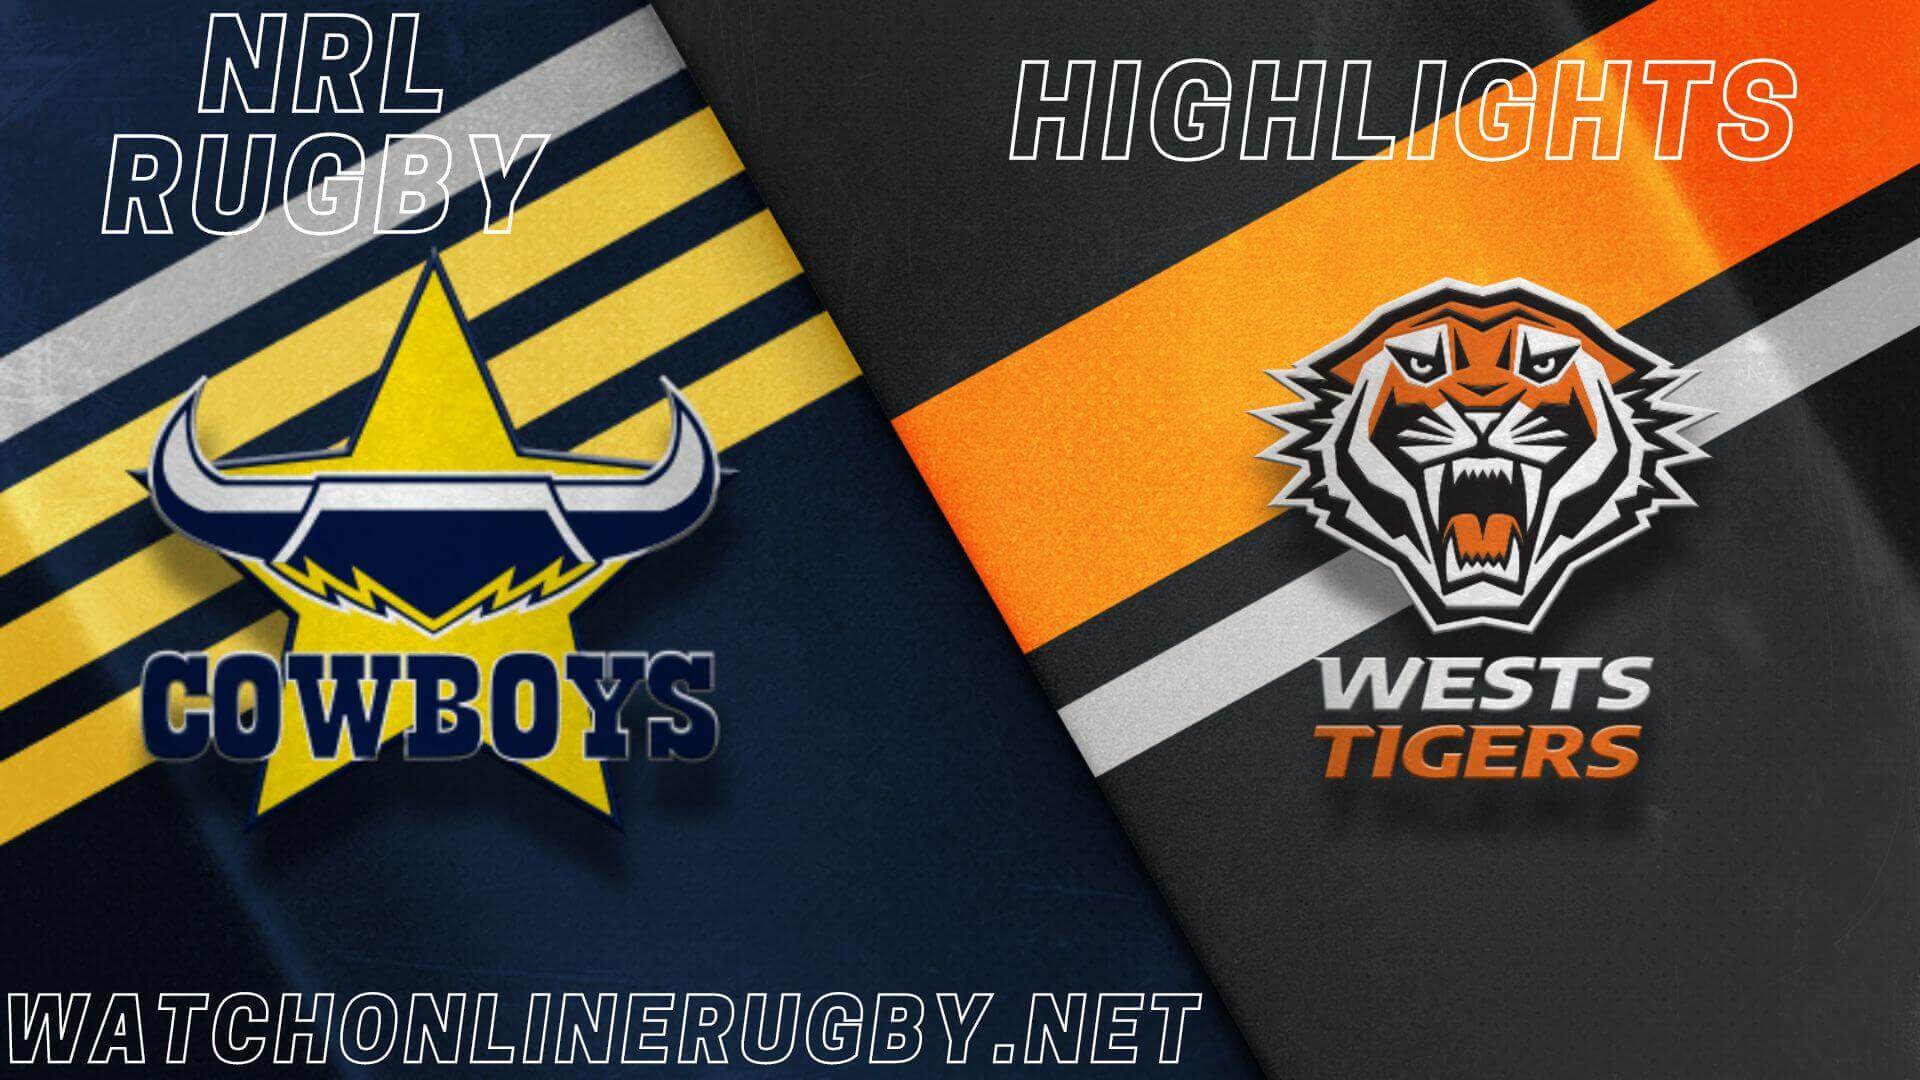 Cowboys Vs Wests Tigers Highlights RD 19 NRL Rugby